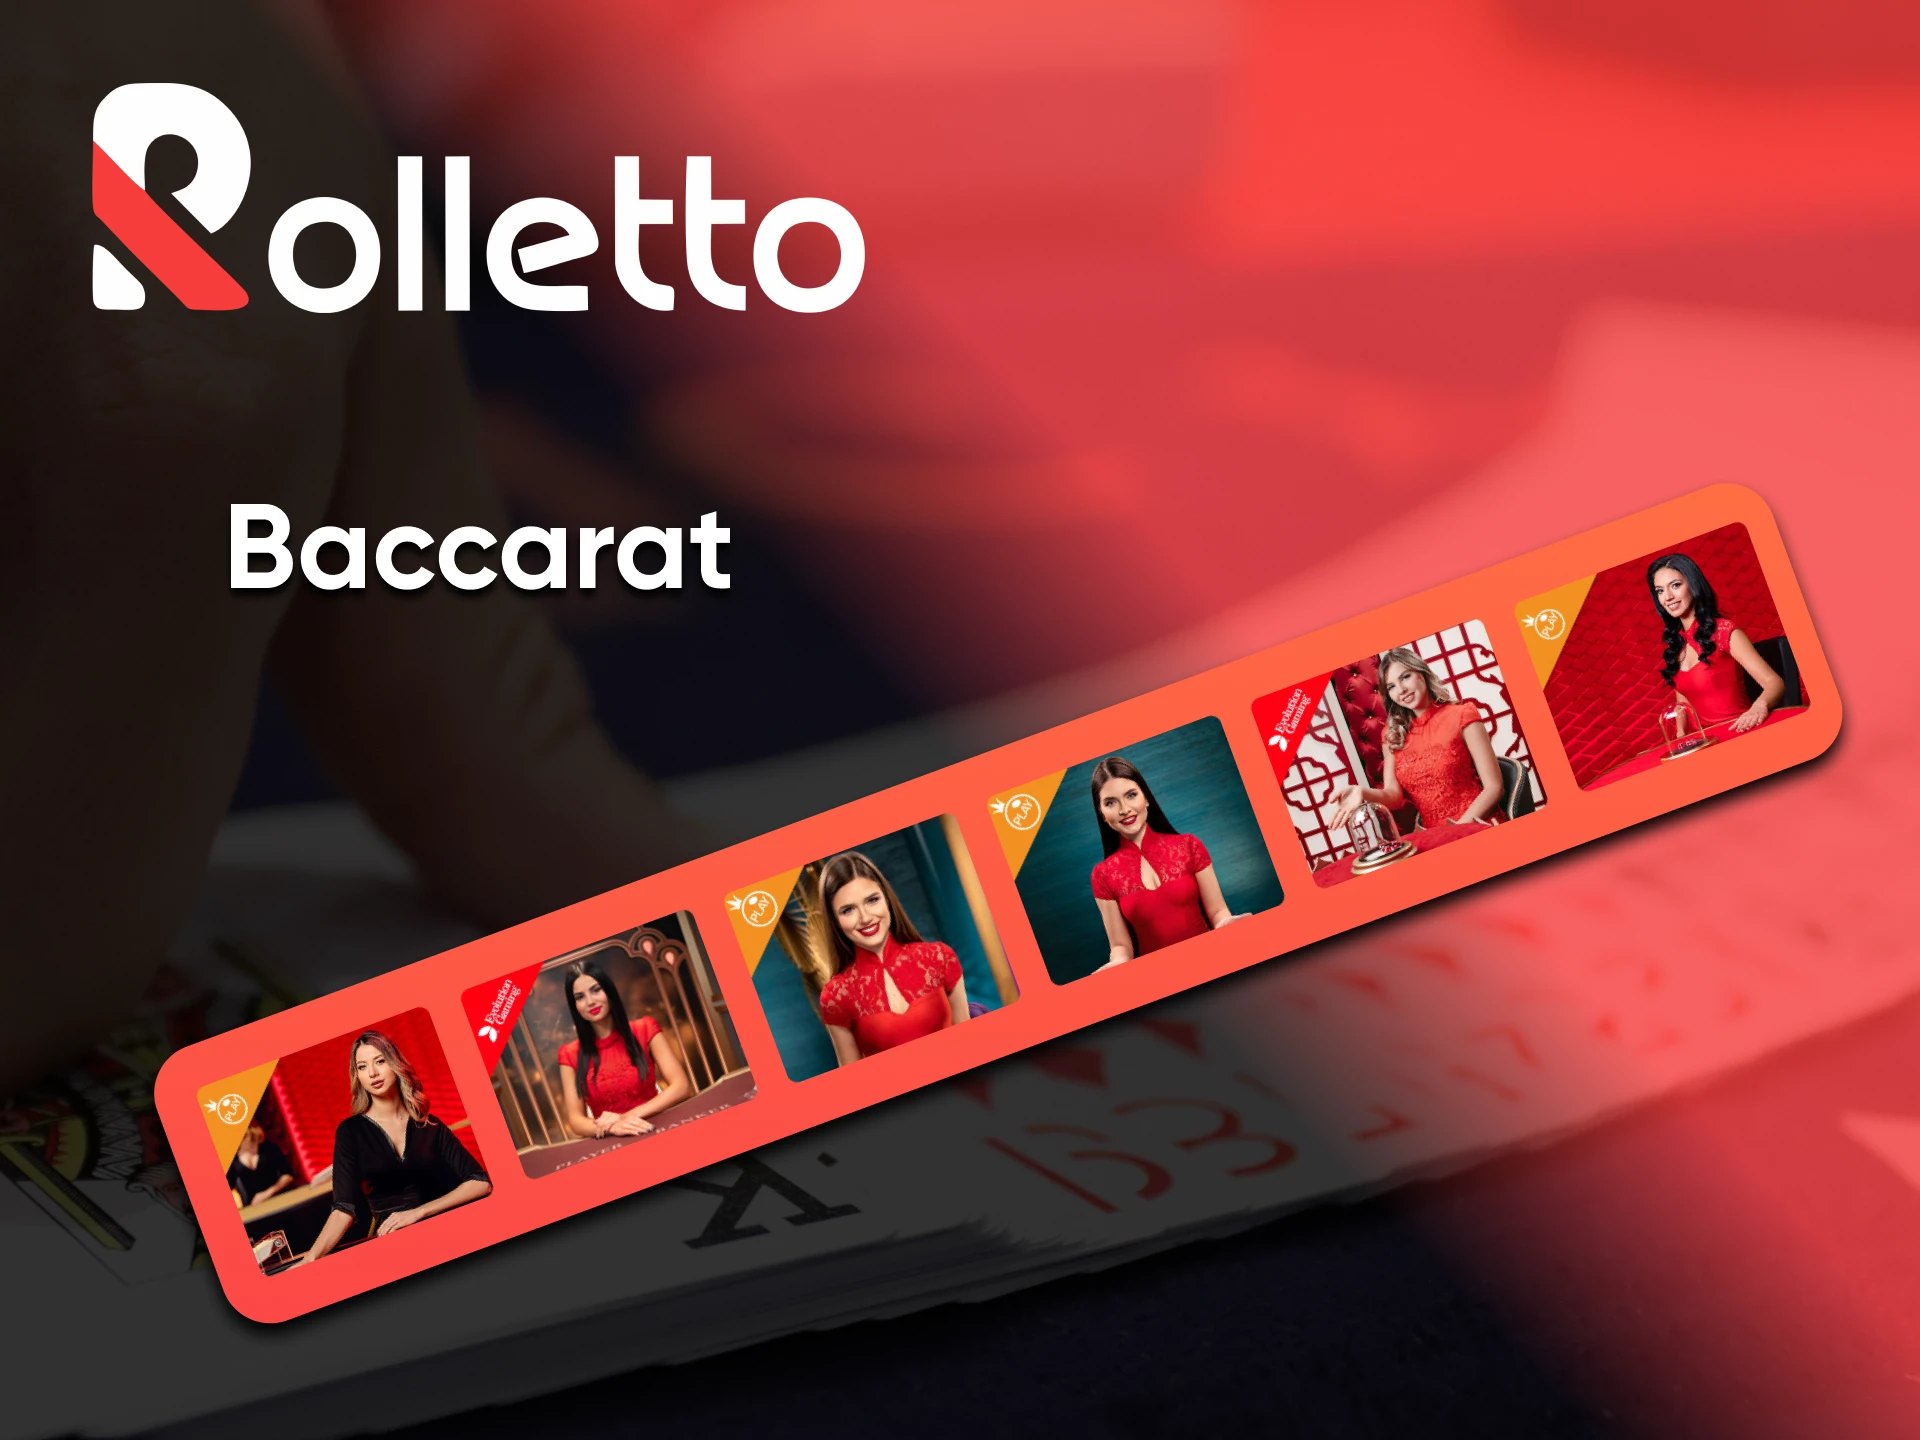 To play Baccarat, go to the special section of the Rolletto website.